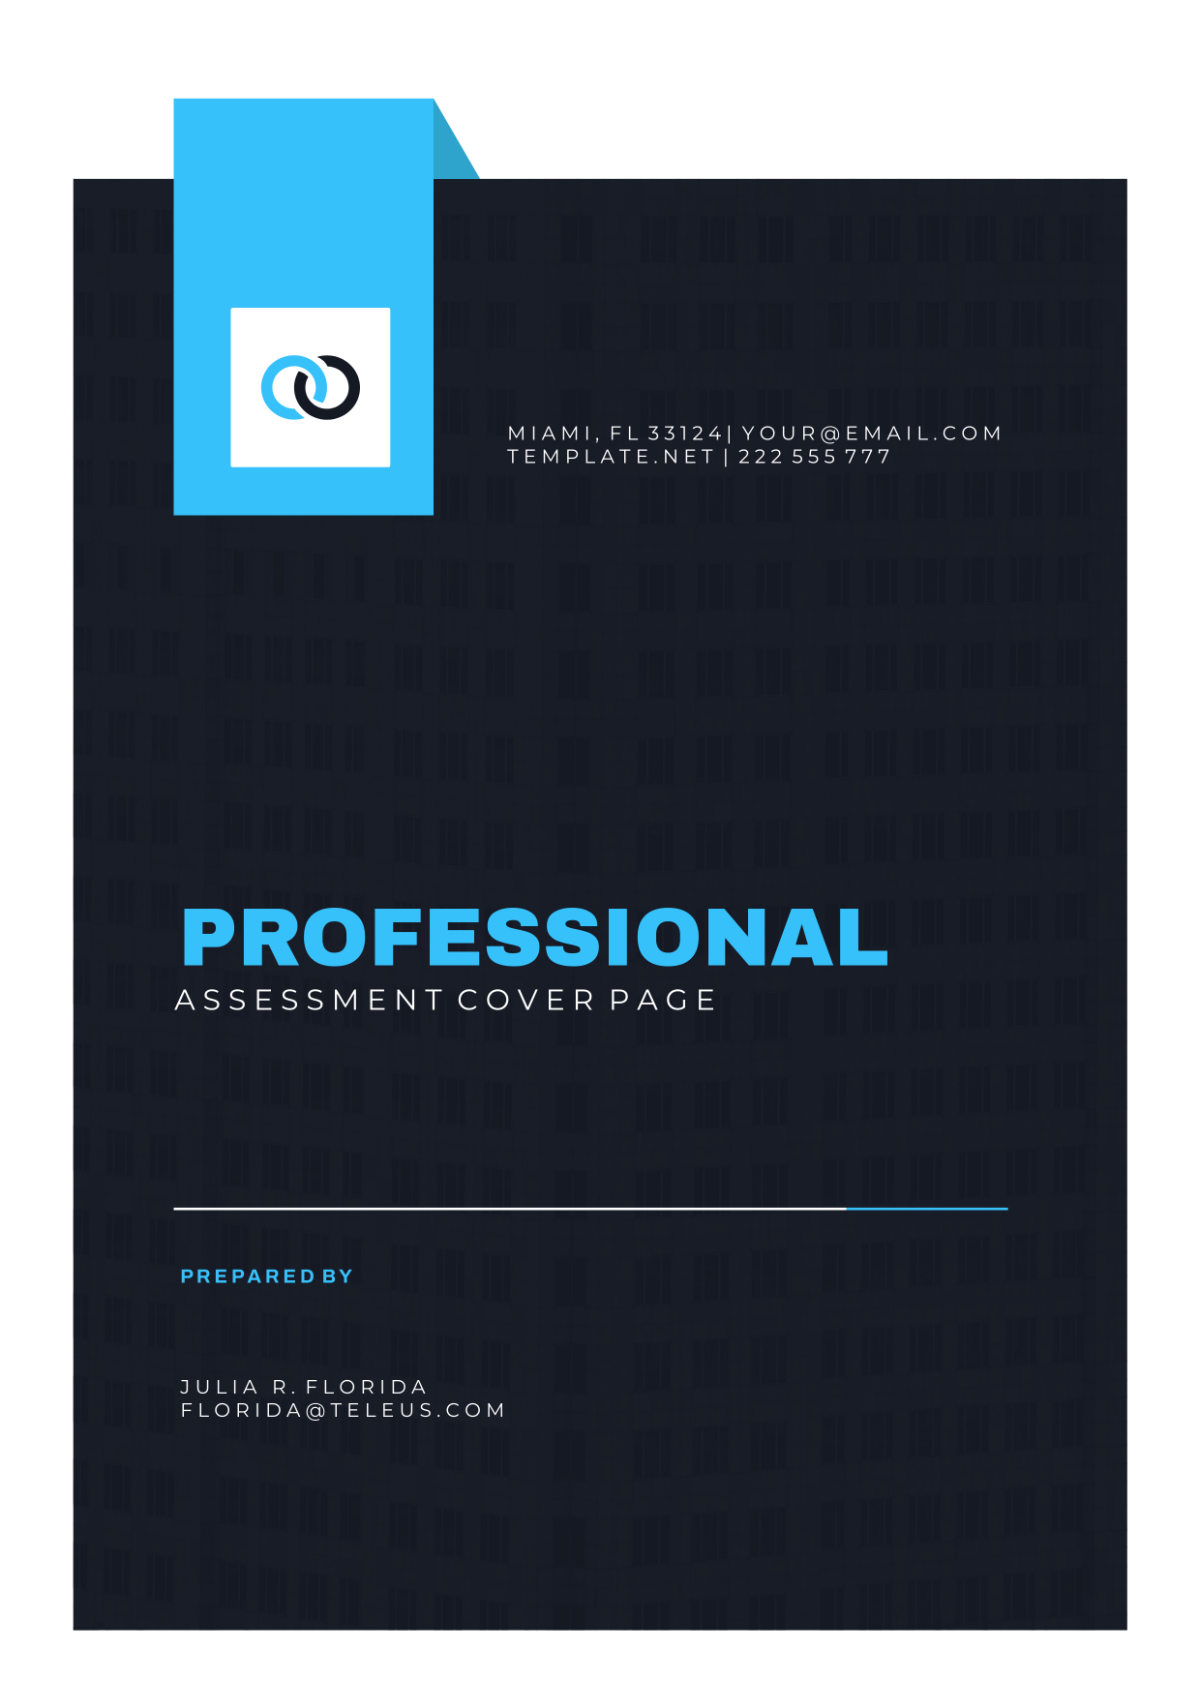 Professional Assessment Cover Page